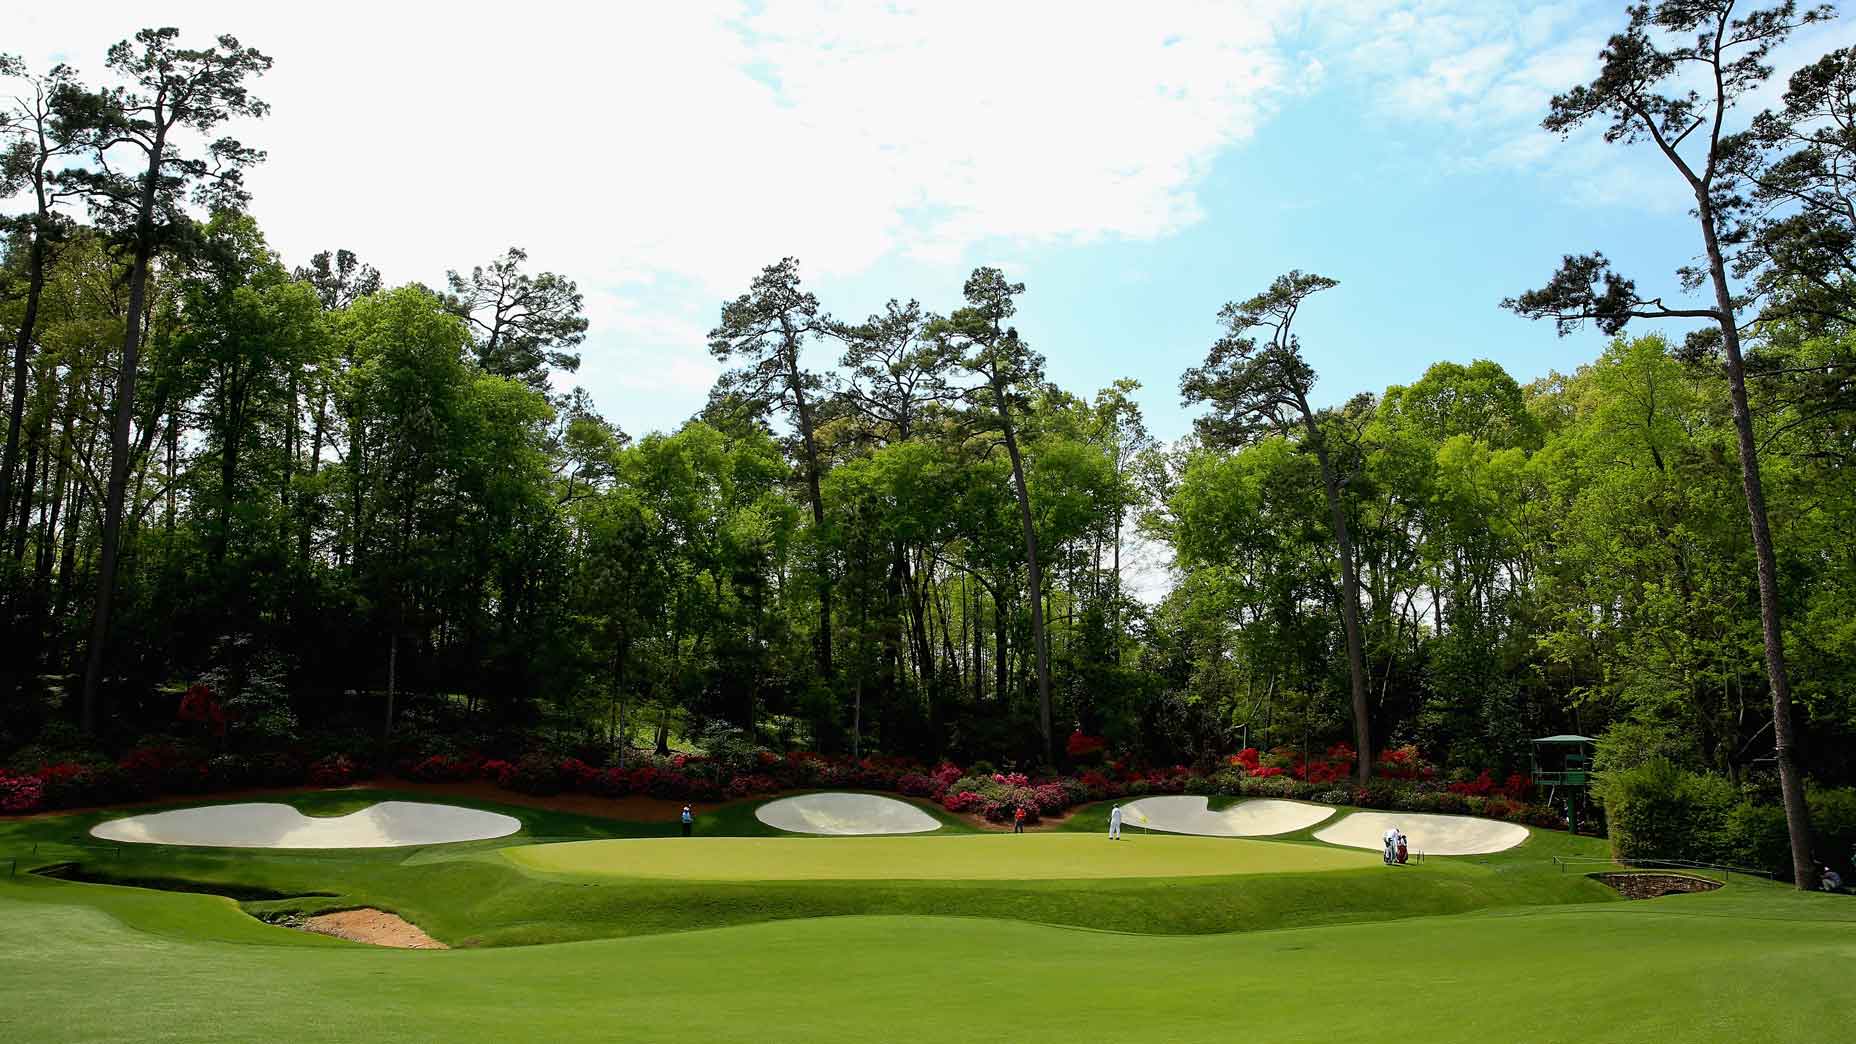 Best golf courses in Georgia, according to GOLF Magazine's raters